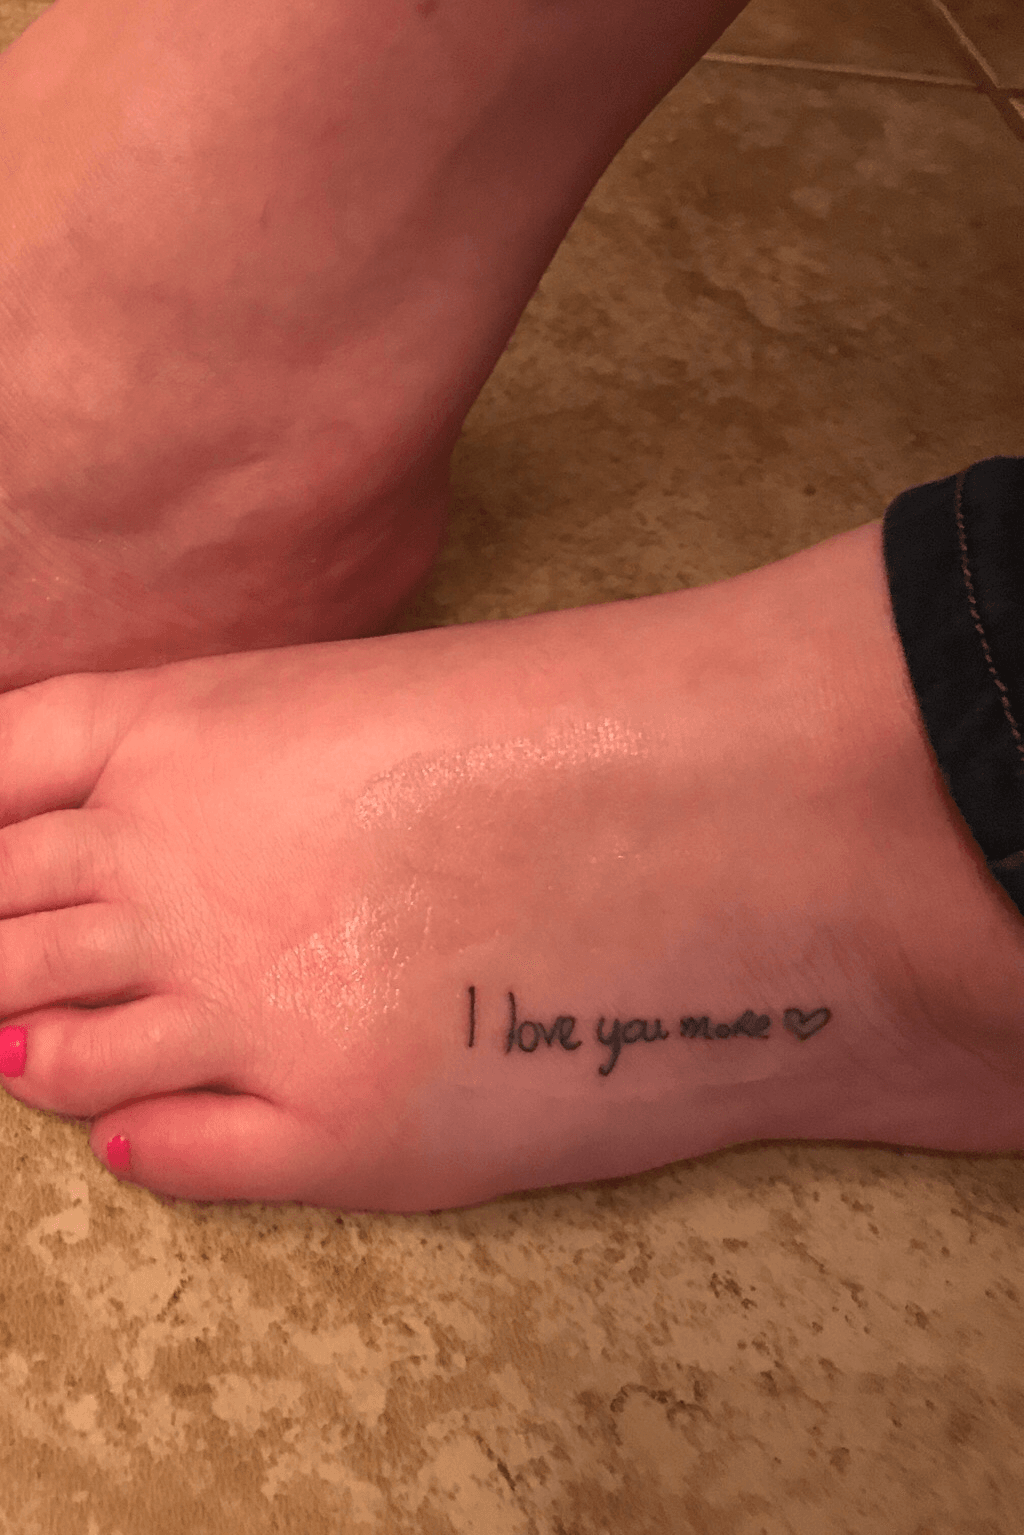 jingstattoo on Twitter I love you handwritten by 3 important people in  her life Thank you Jessika jessikaxo for the trust Her original post  Finally got the tattoo Ive been waiting for 